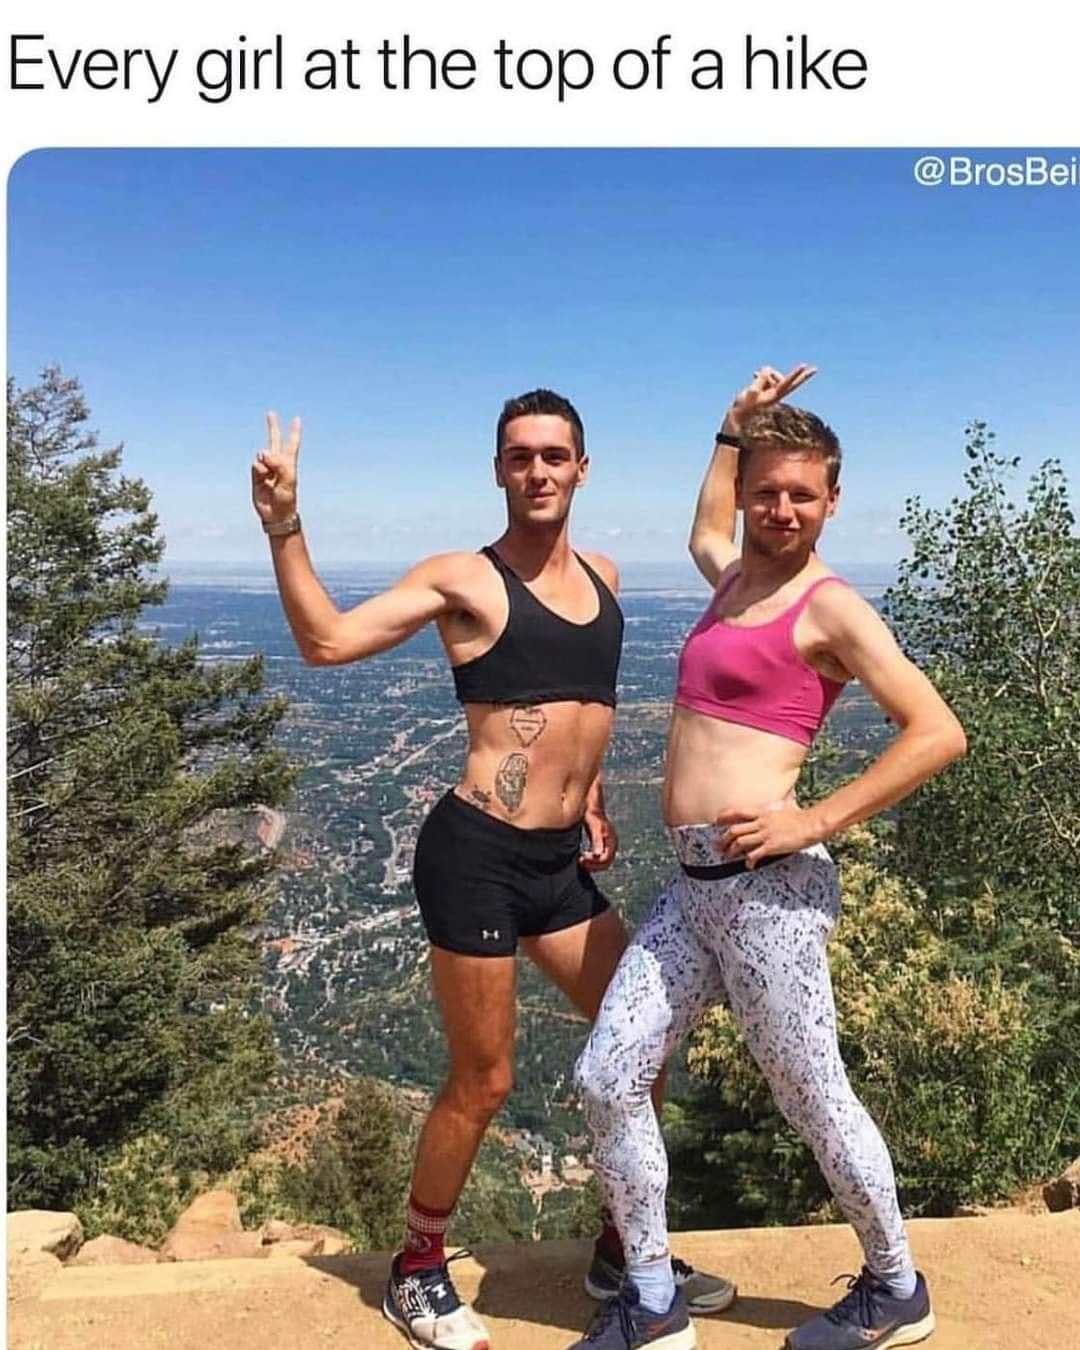 Every girl at the top of a hike.